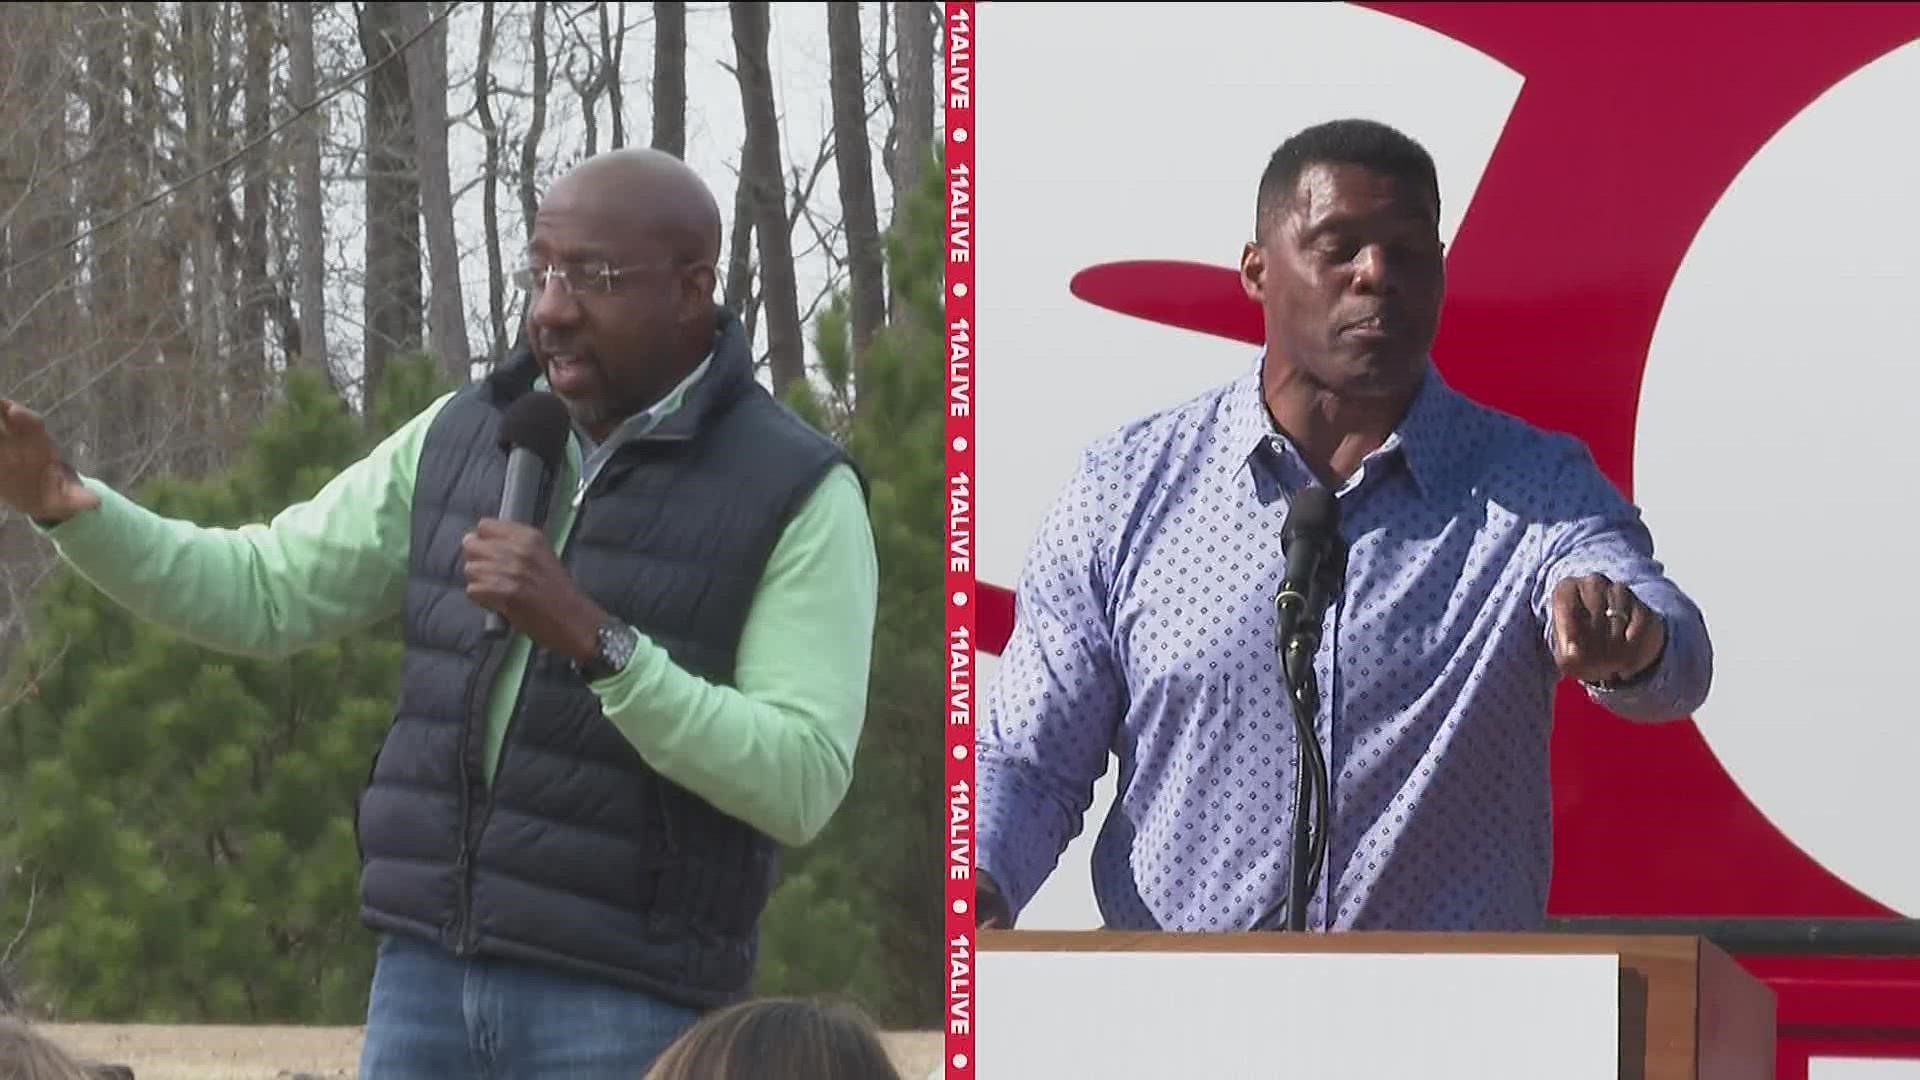 Both are rallying more voters ahead of the Dec. 6 runoff election.